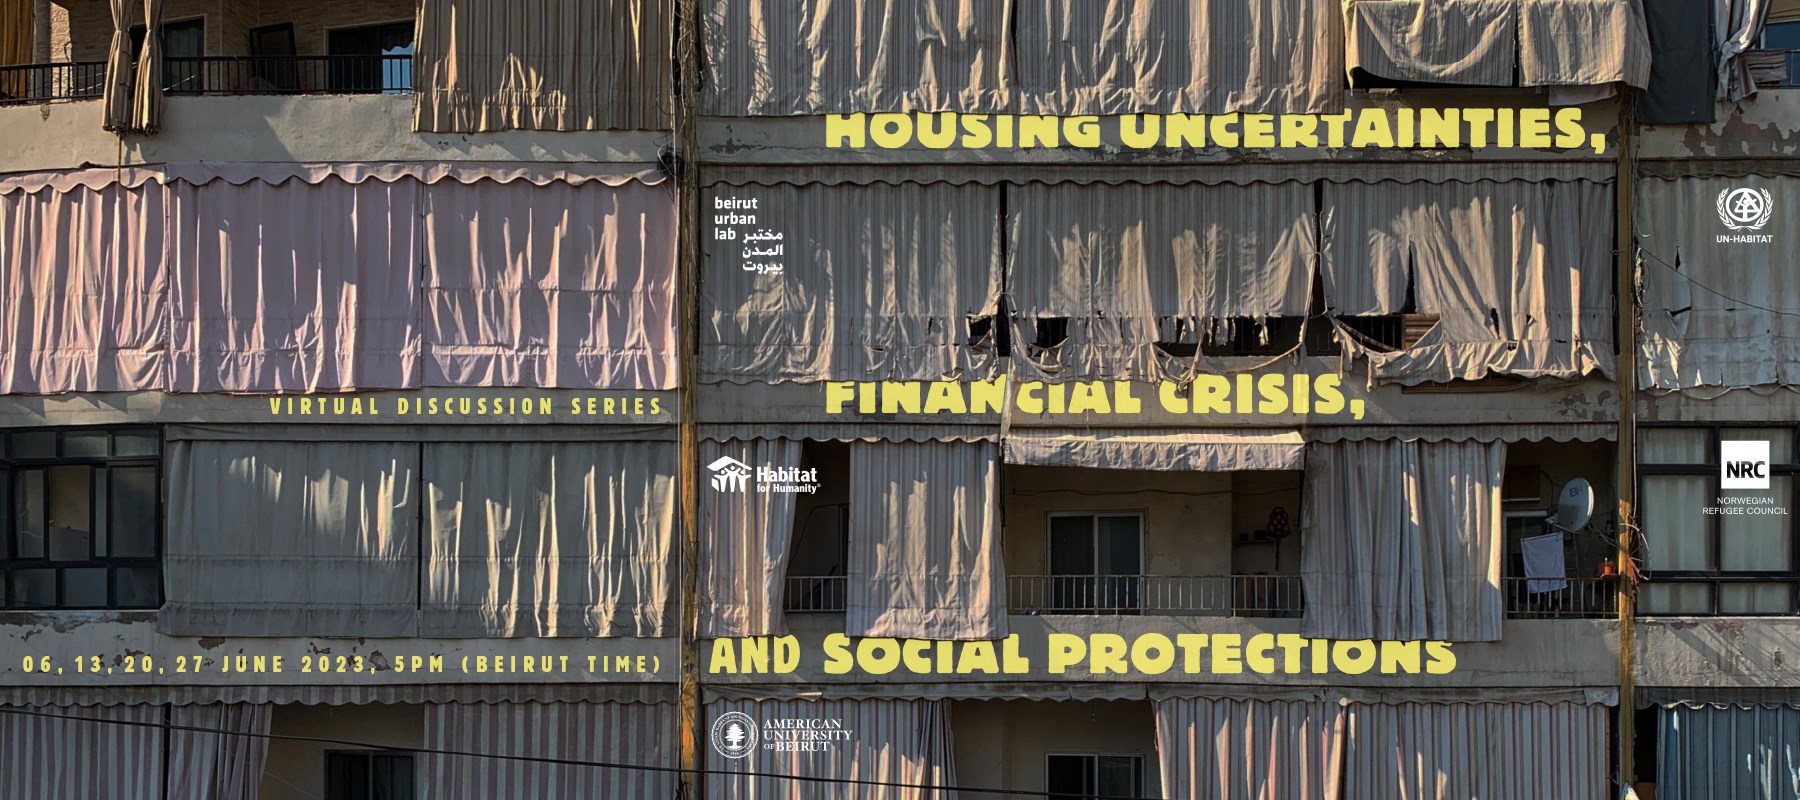 Housing Uncertainties, Financial Crisis, and Social Protections